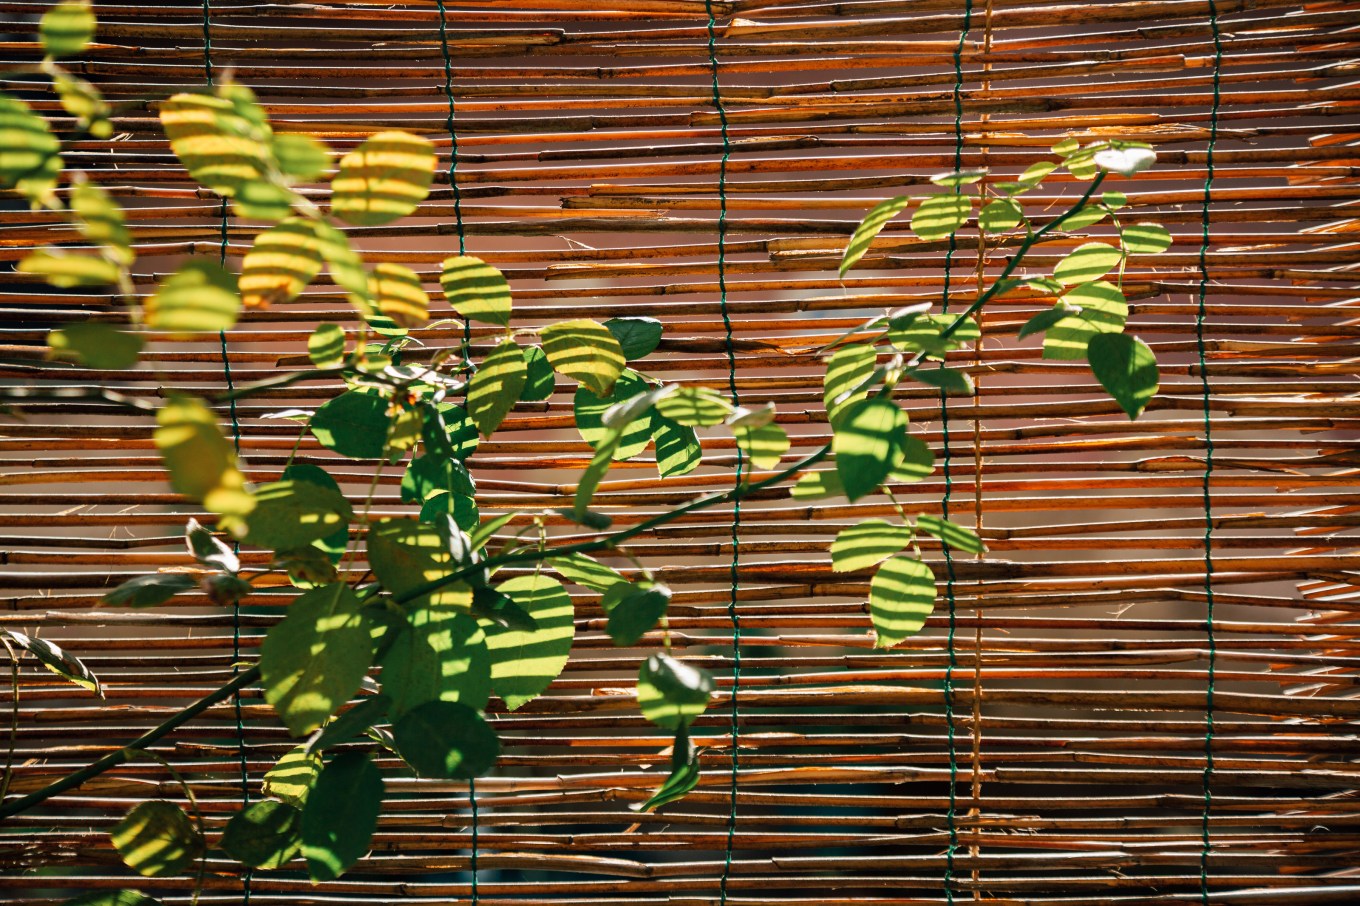 Close up of bamboo blinds with light filtering through.